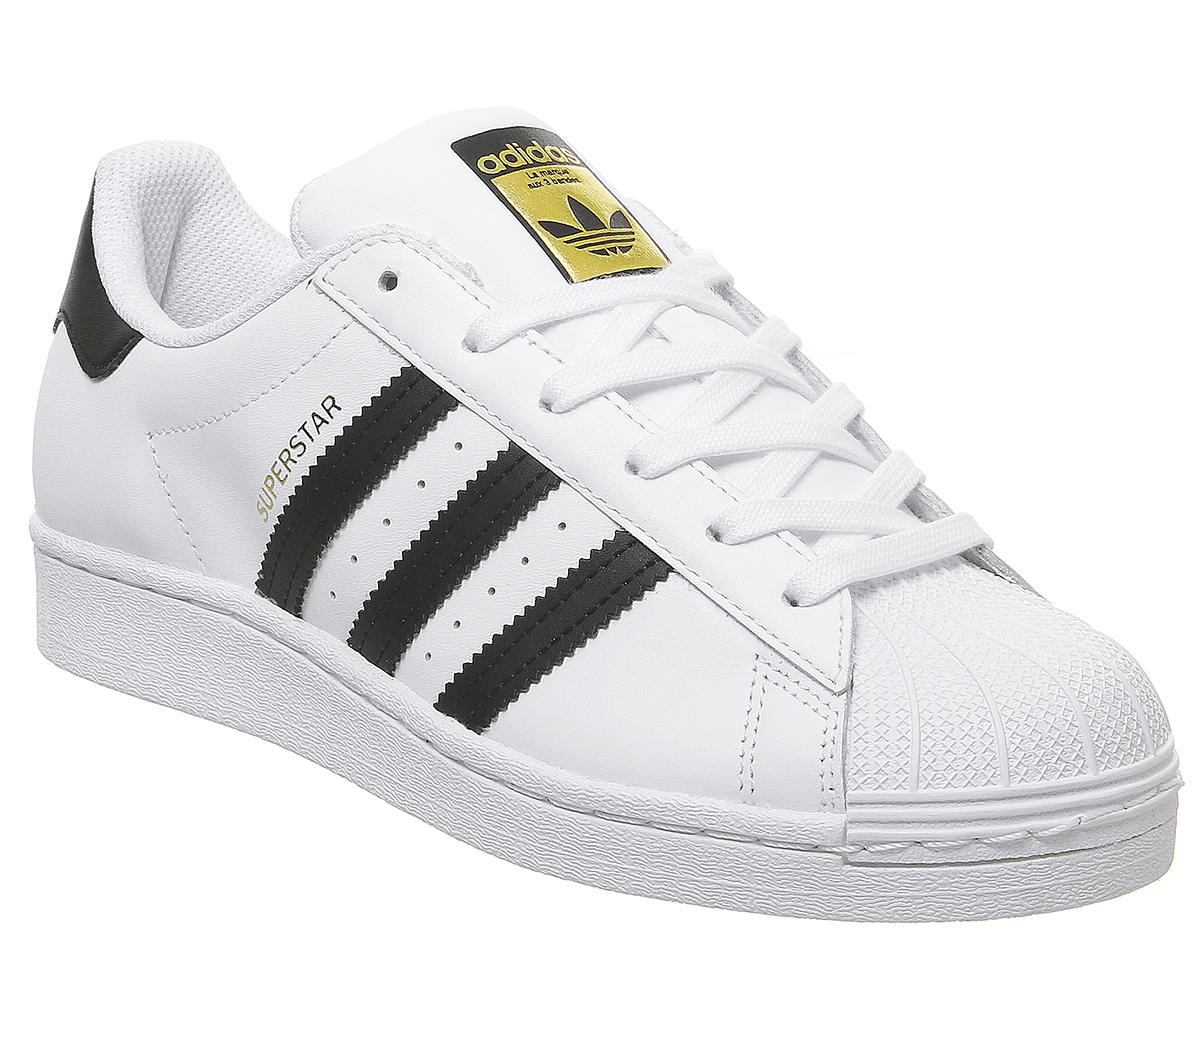 adidas Superstar Gs Trainers White Black White - Hers trainers